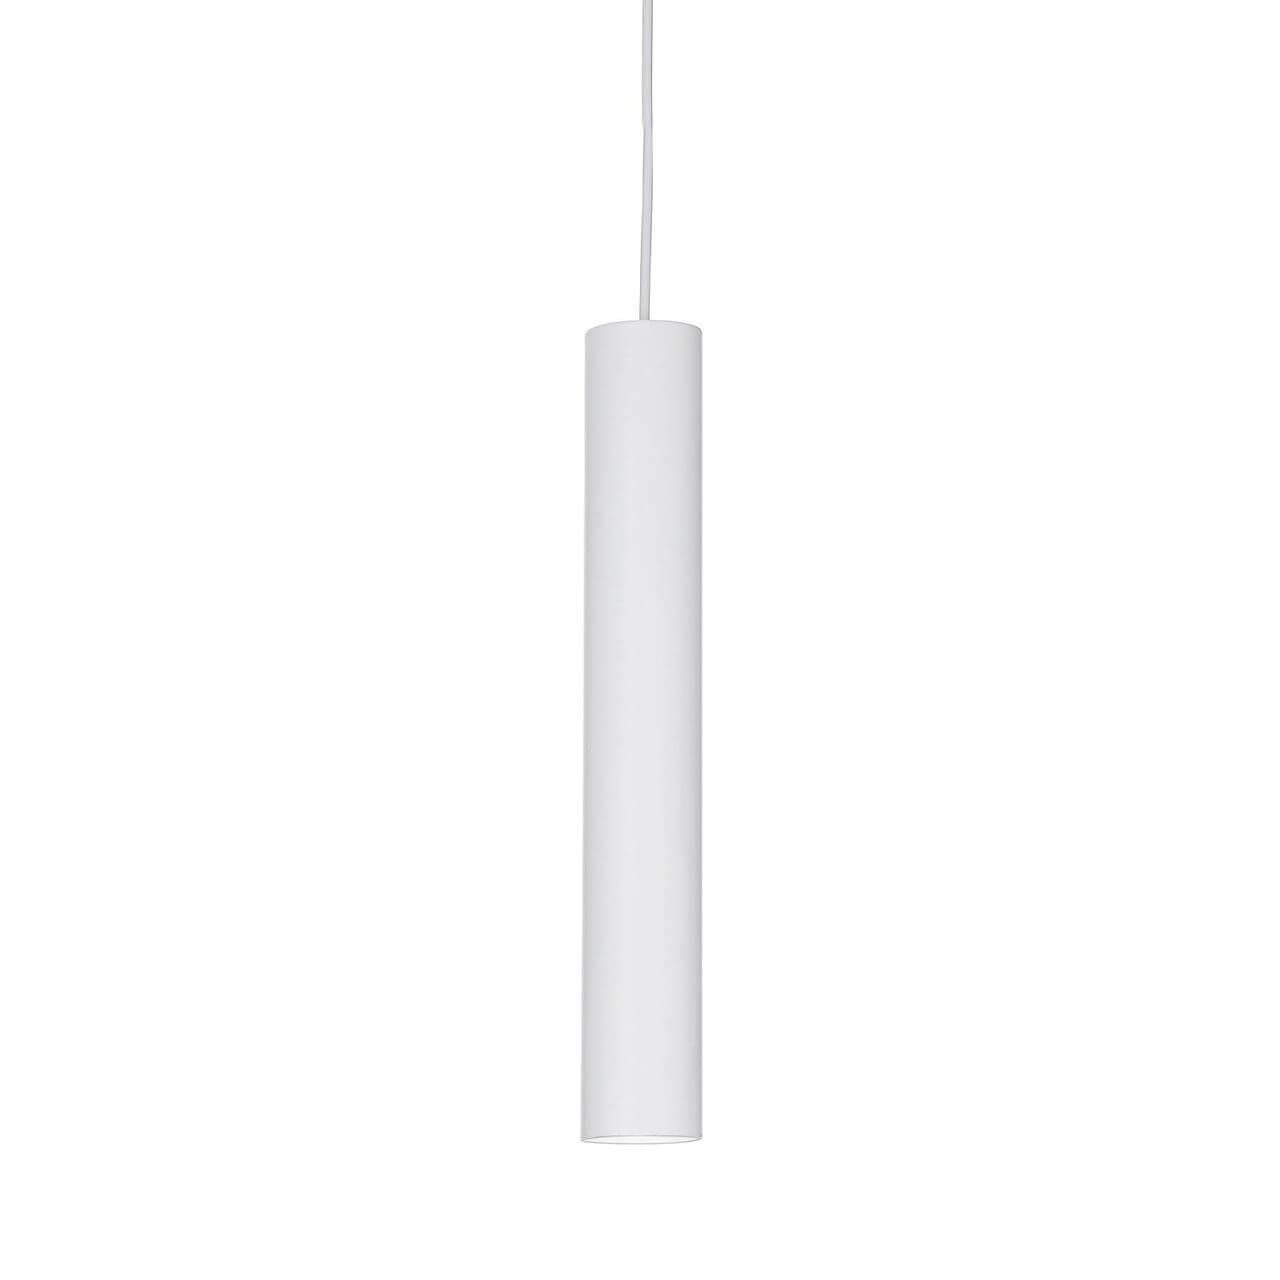    Ideal Lux Tube D4 Bianco 211459